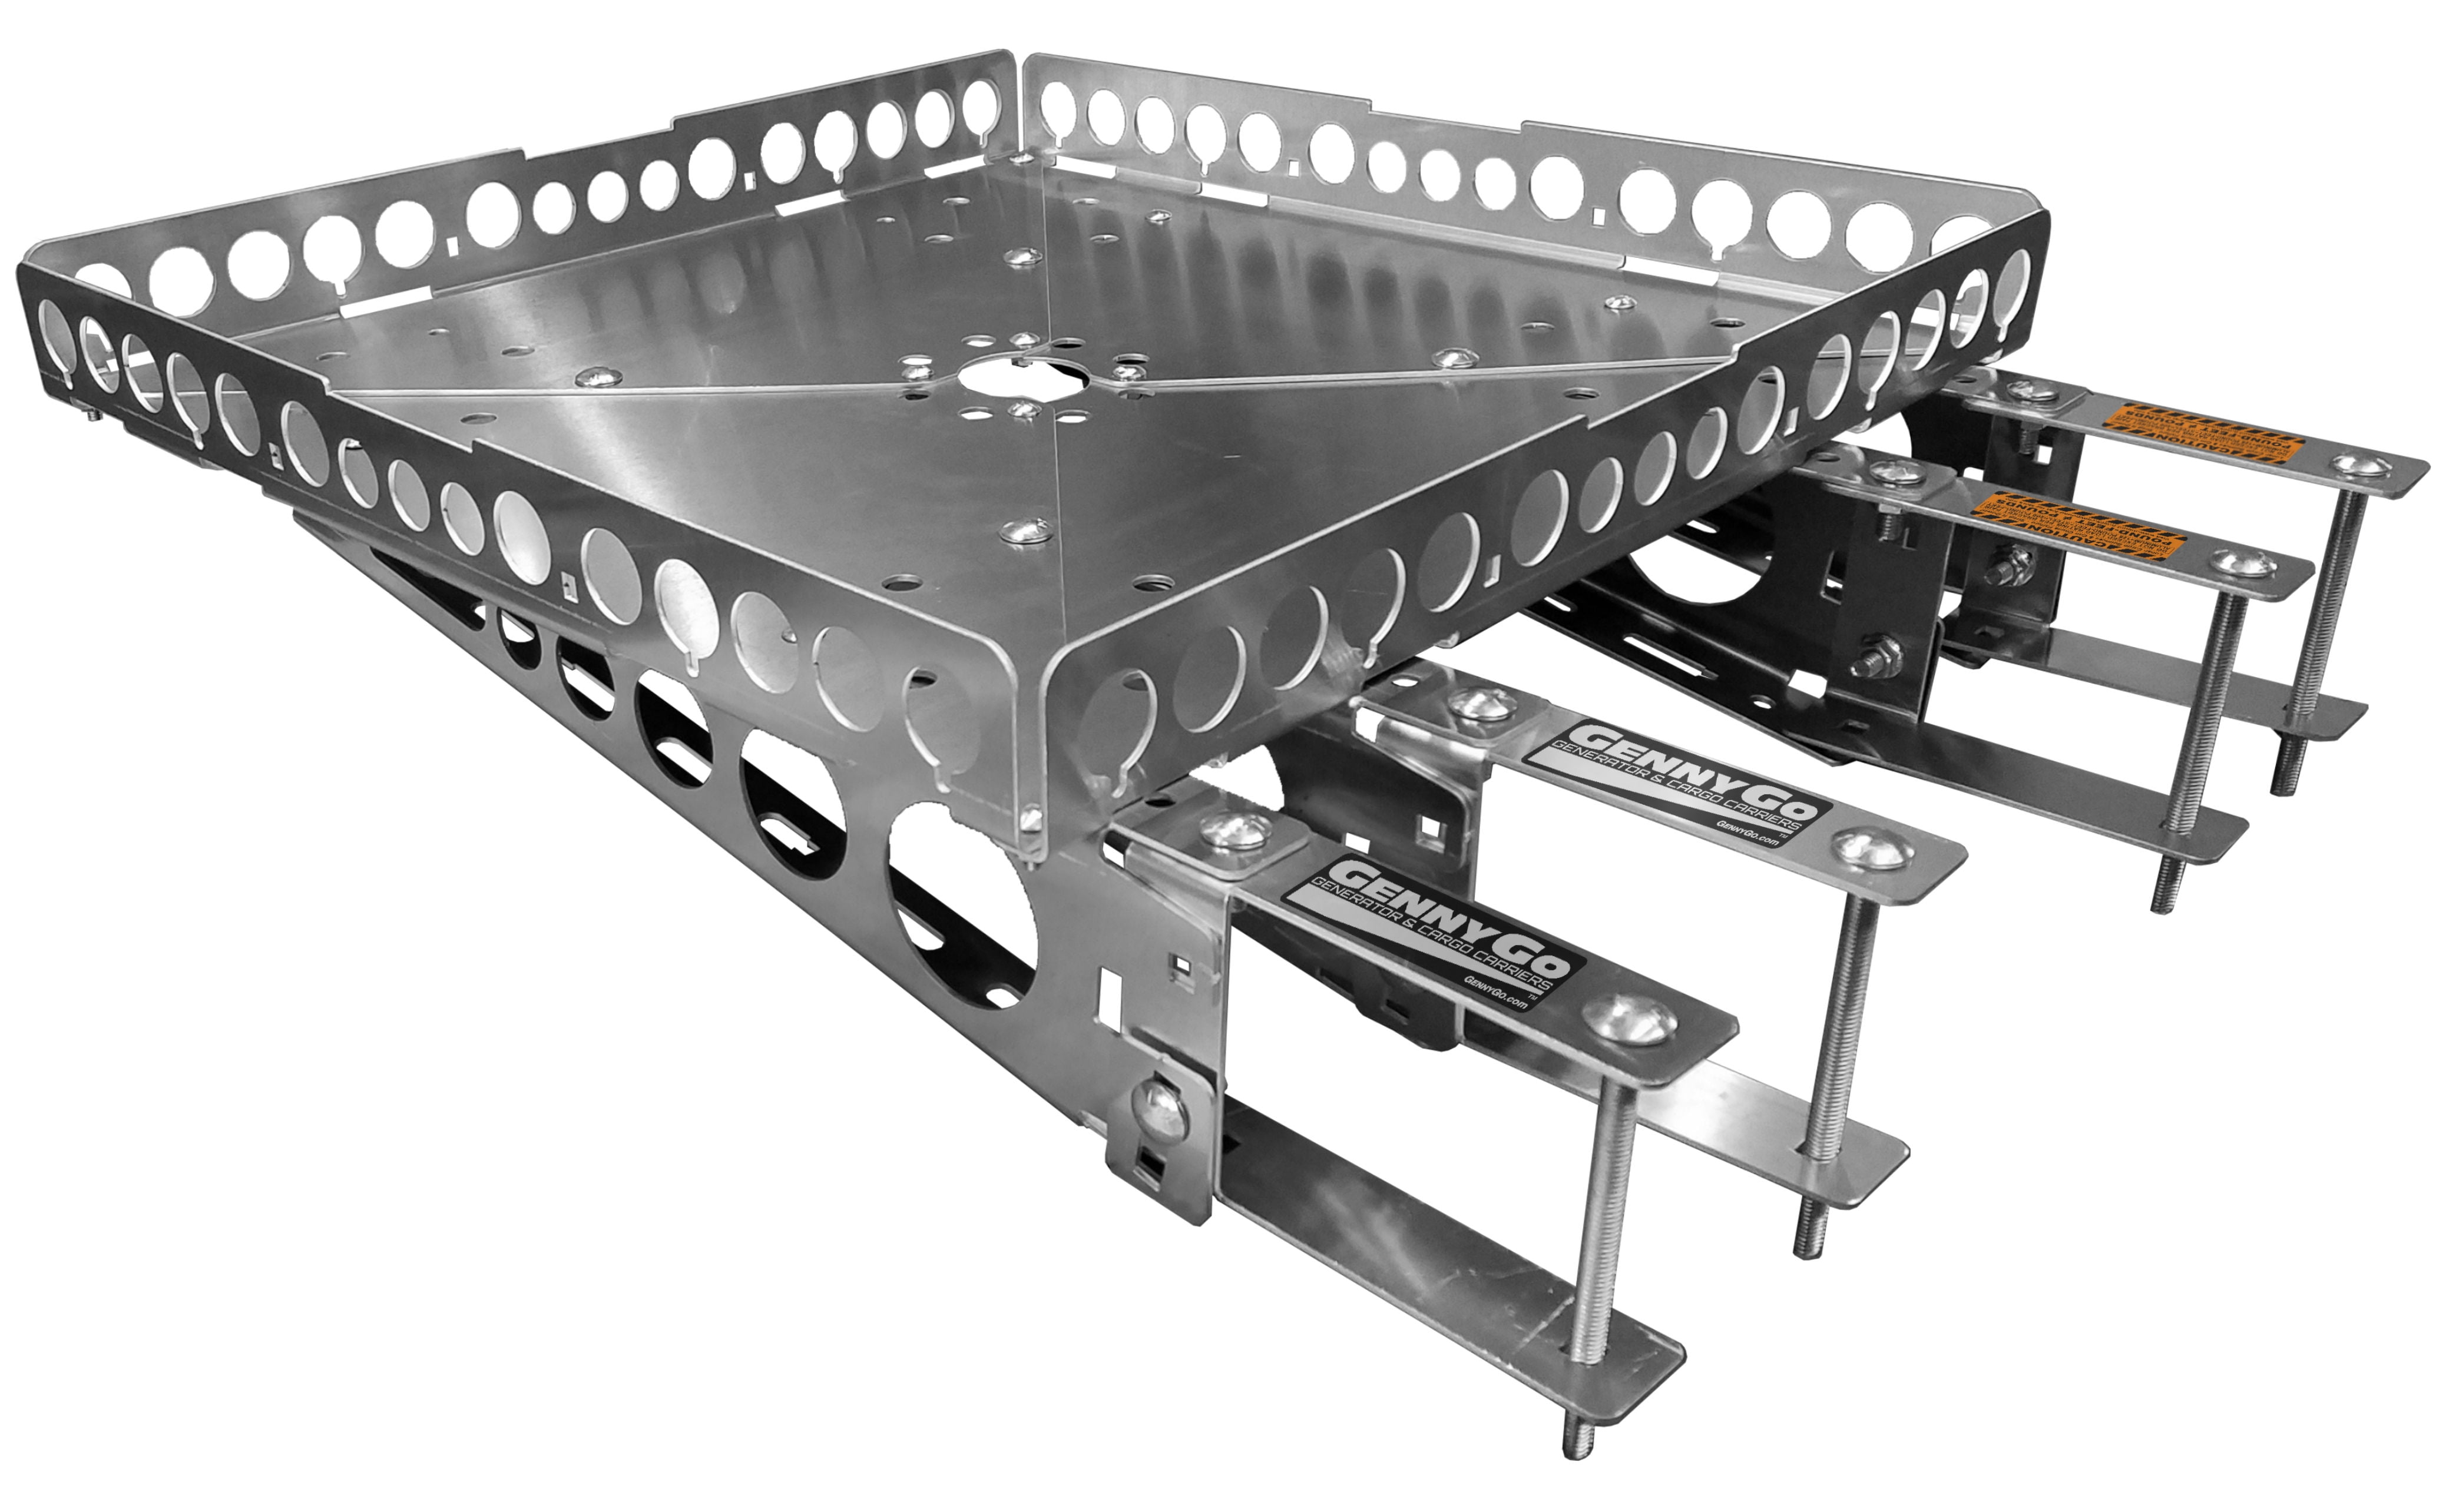 A Pair! ECOTRIC Universal RV 4 Square Bumper Mounting Mounted Cargo Carrier Box Support Arms Bracket Mounting Racks.